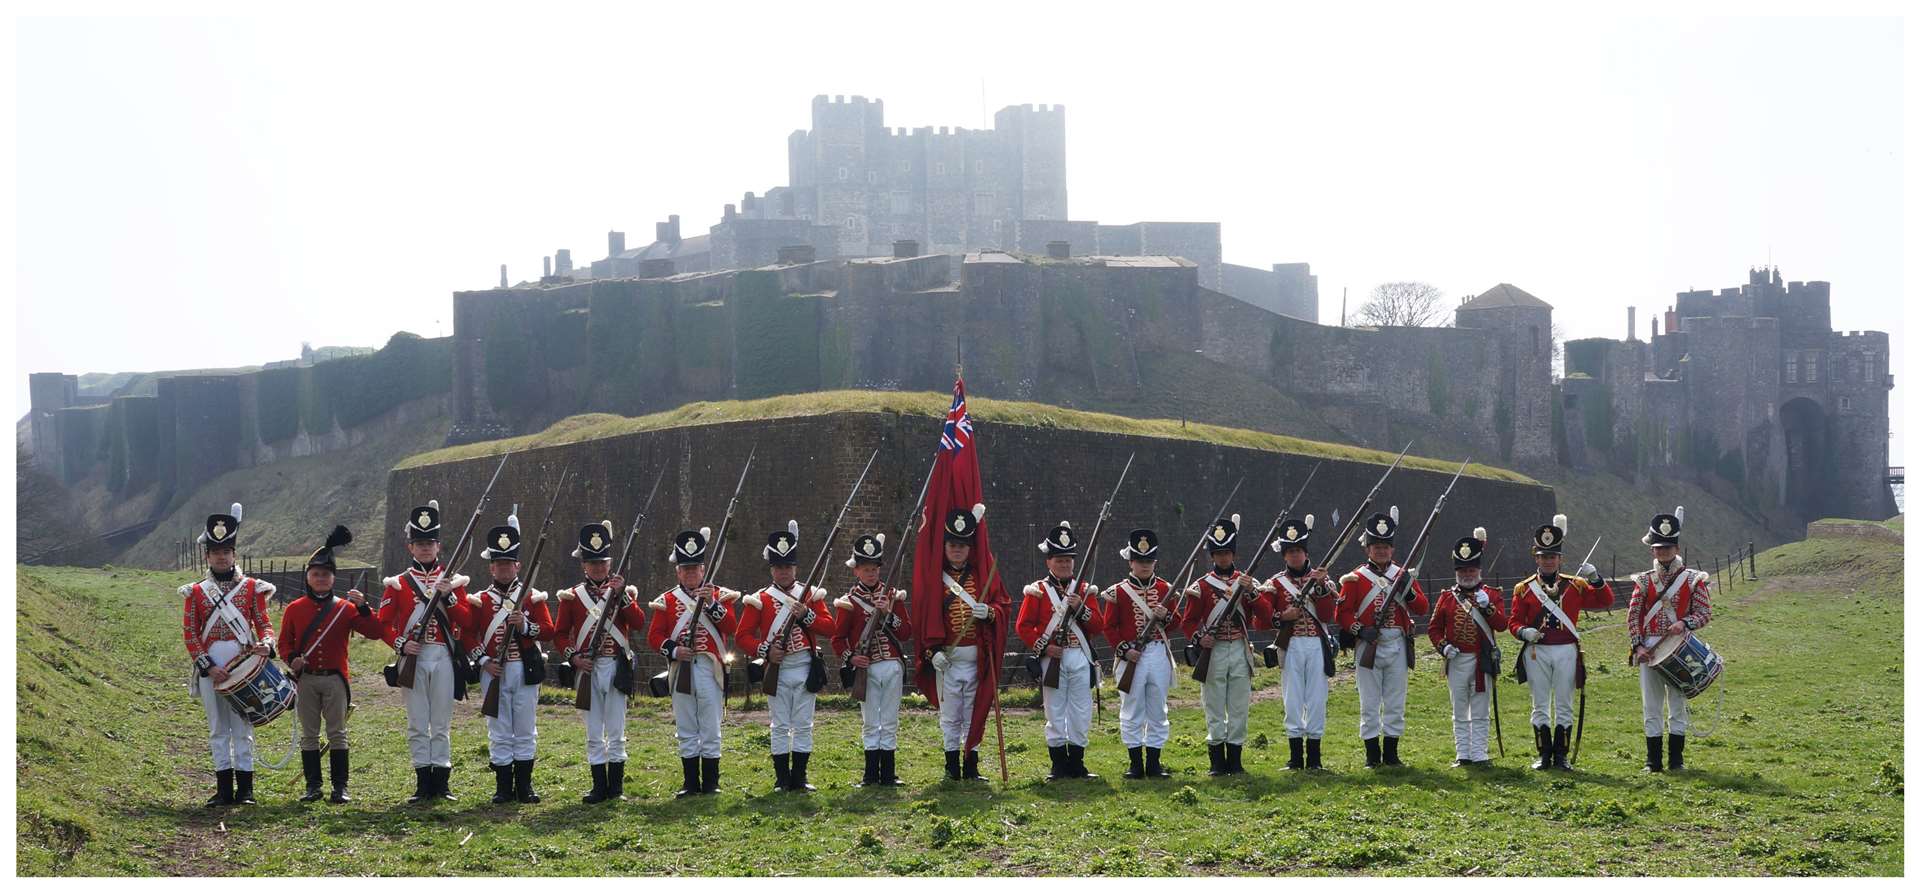 The 1st Foot Guards meet on the first Sunday every month at Dover Castle